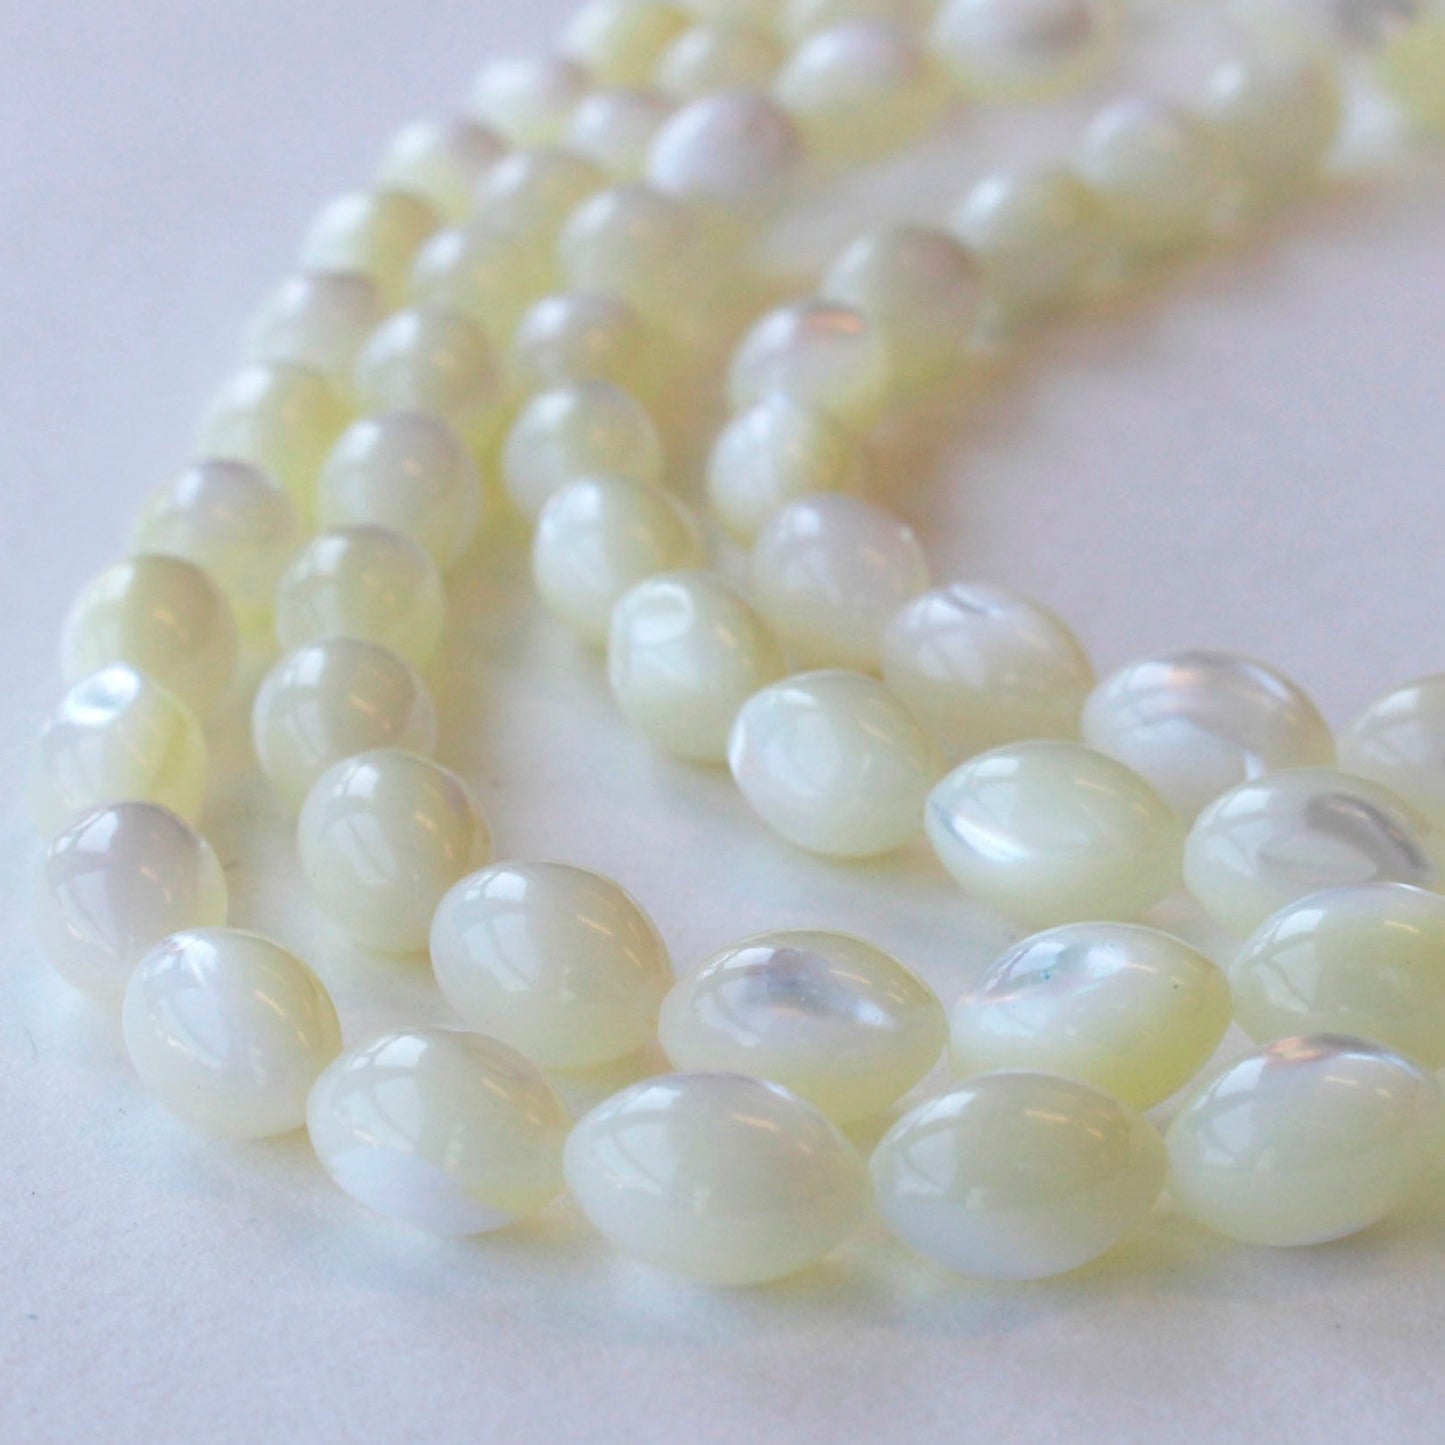 7.5x10.5mm Mother of Pearl Lemon Shape - 16 inches